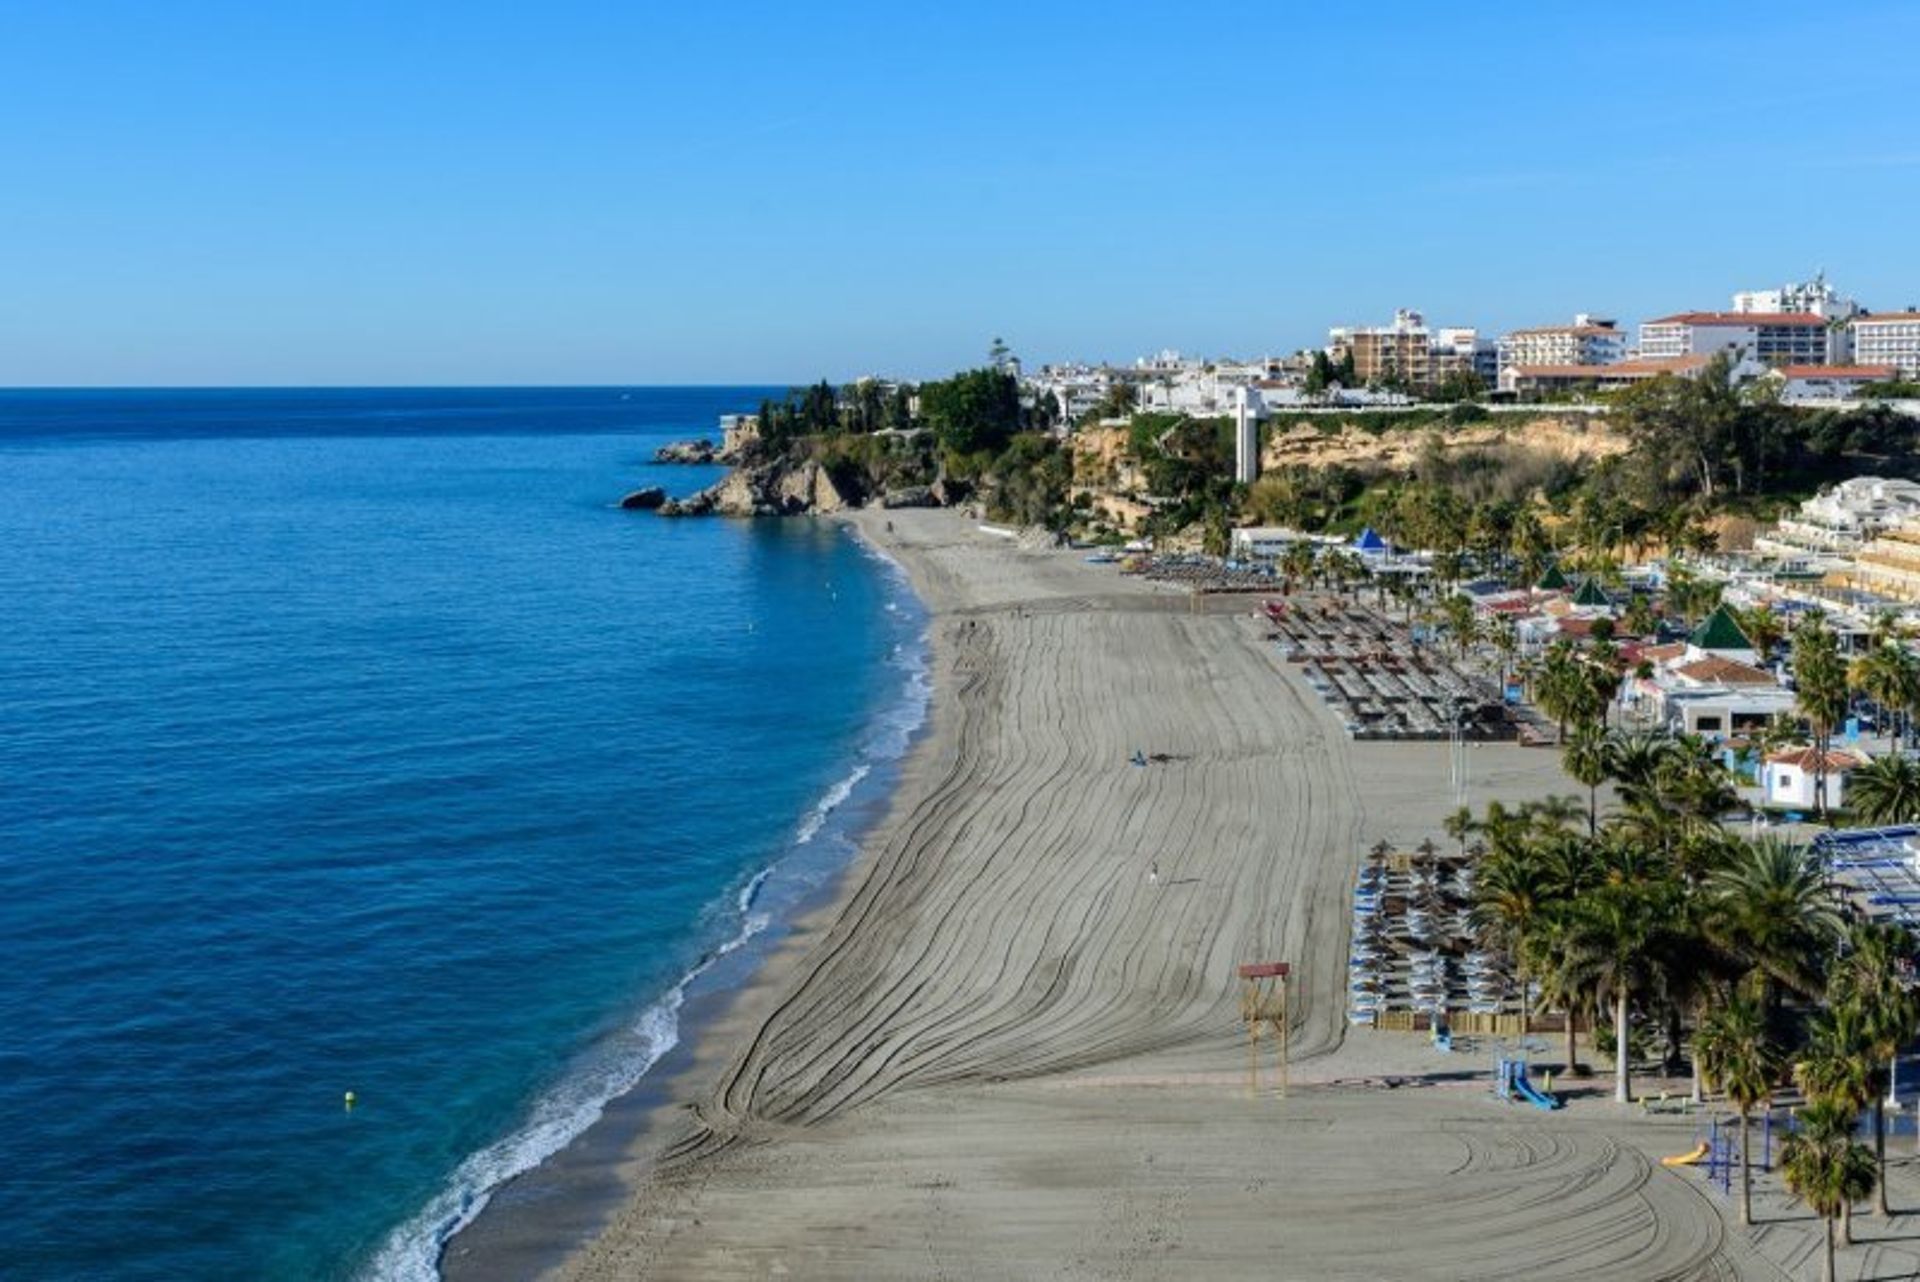 For a lovely family day out by the coast, head to Nerja's local Burriana beach with its powdery sand and aquamarine waters